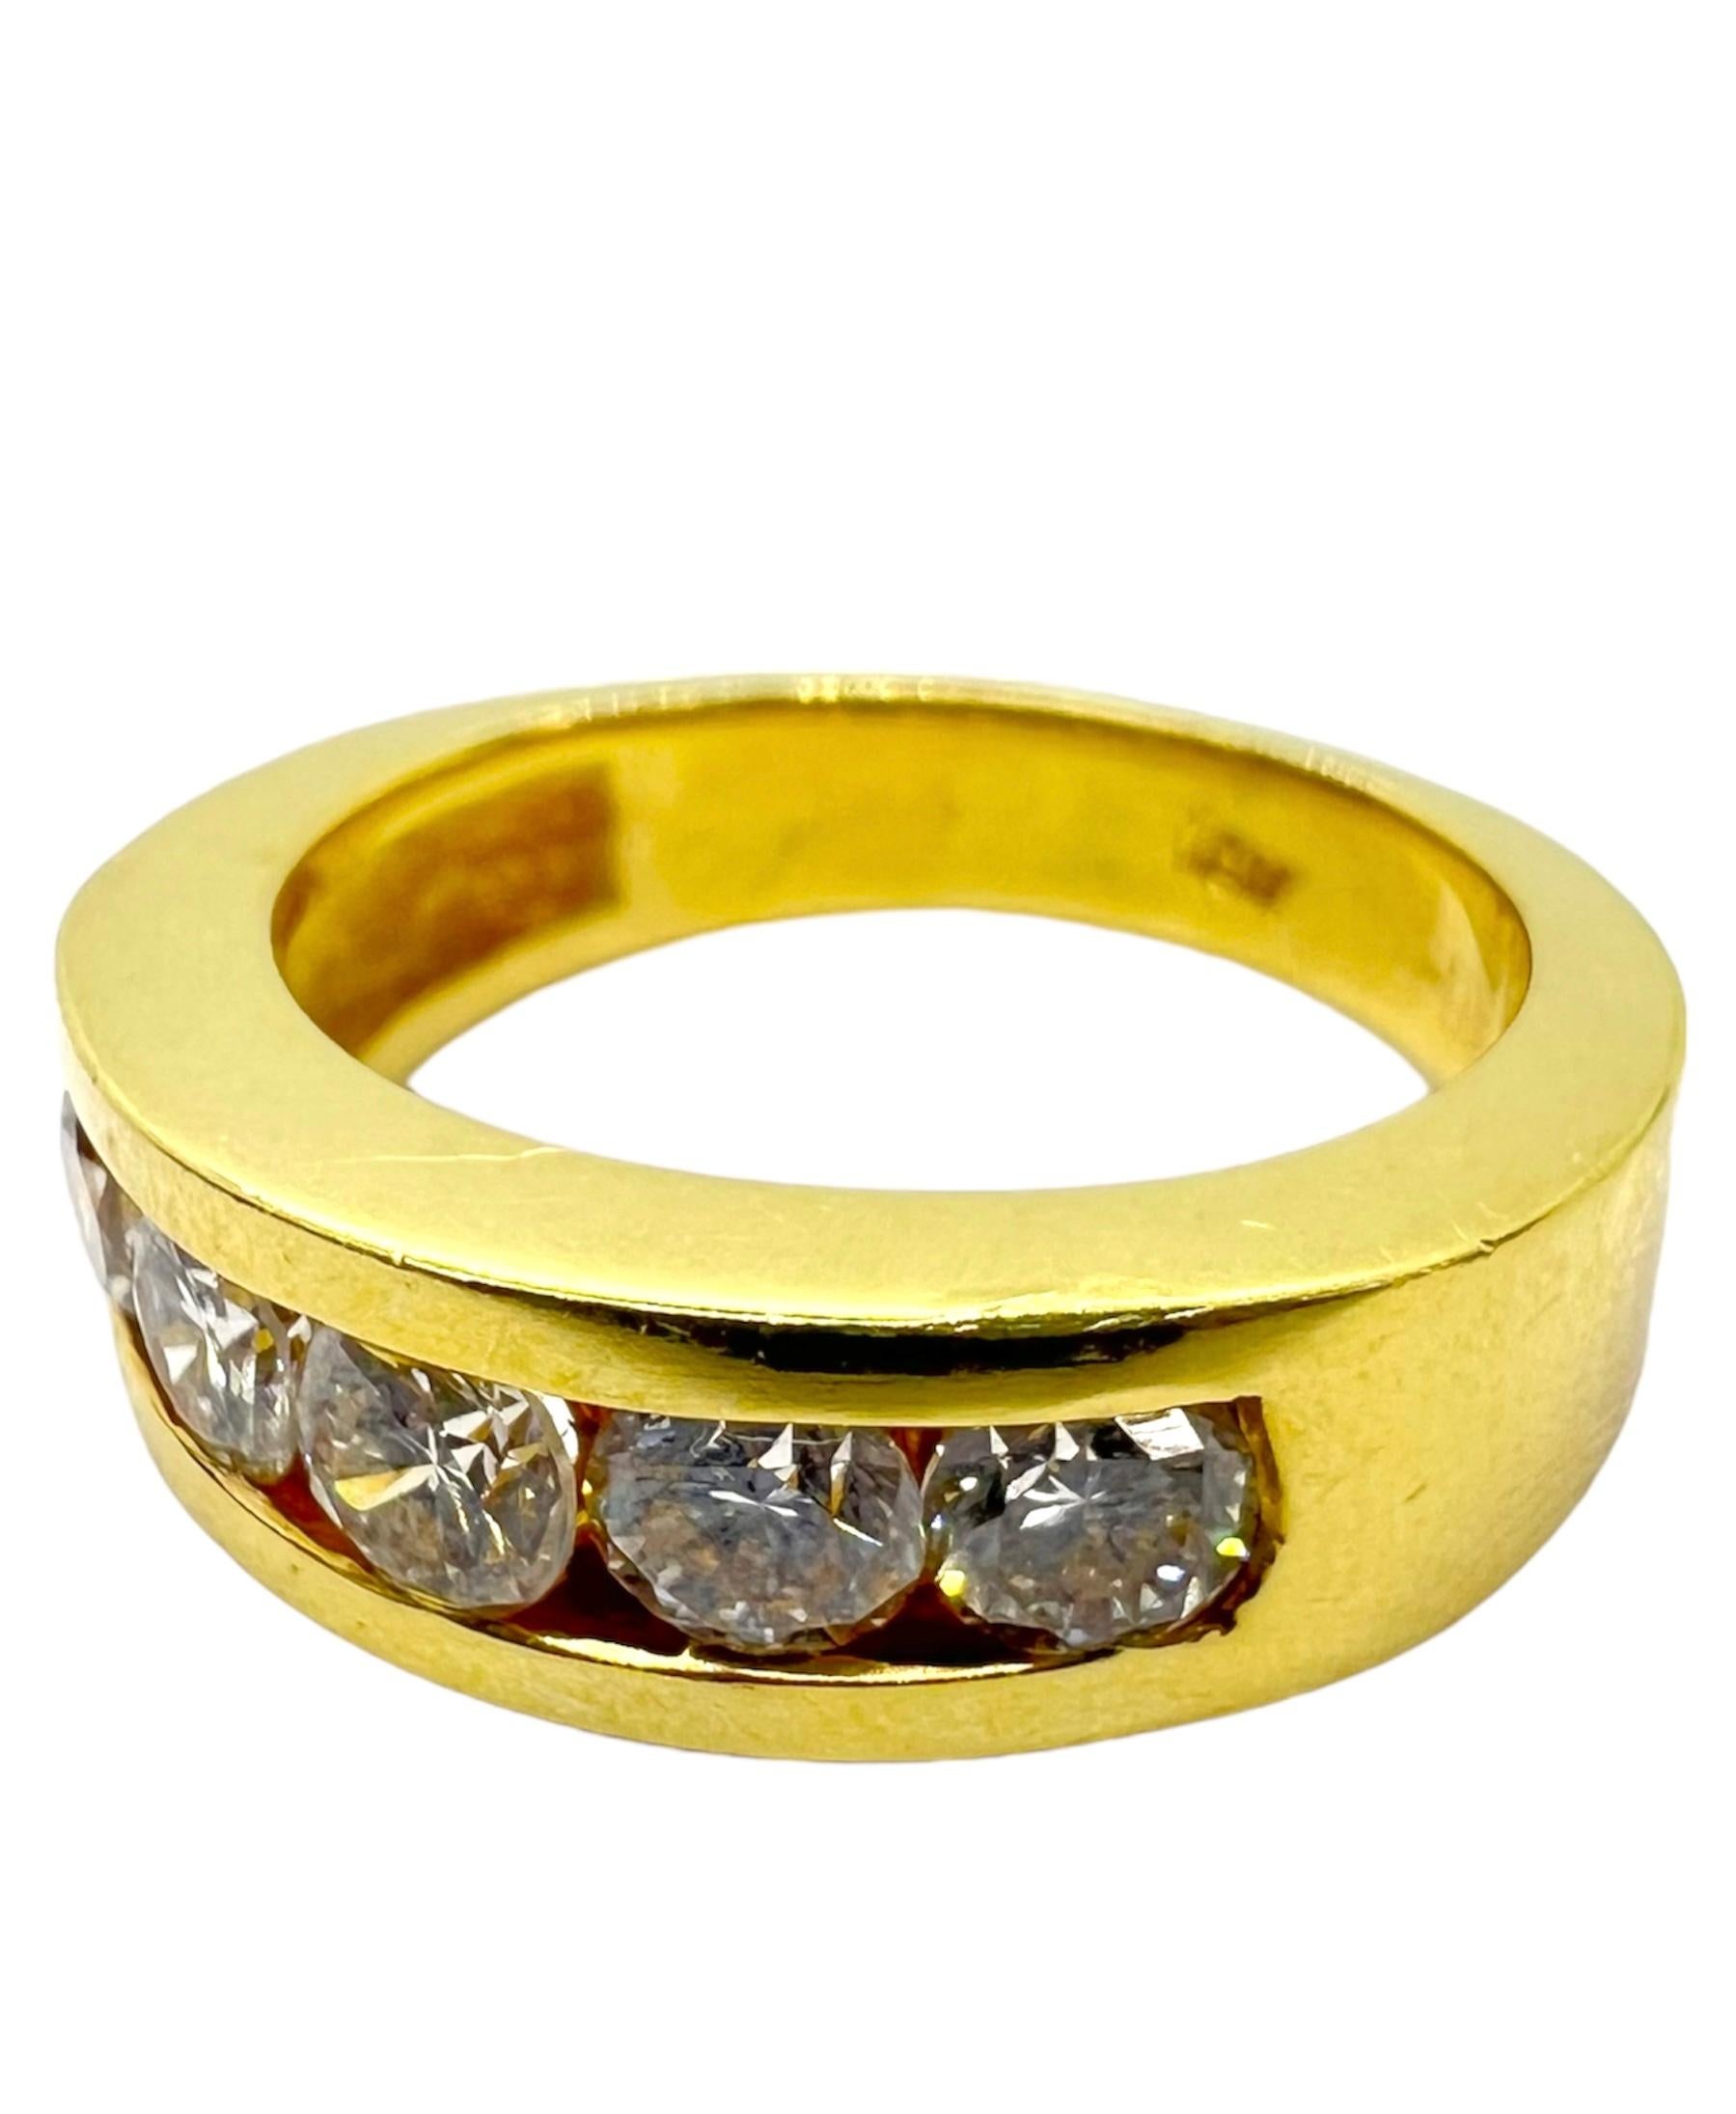 18K yellow gold band ring with round diamonds.

Sophia D by Joseph Dardashti LTD has been known worldwide for 35 years and are inspired by classic Art Deco design that merges with modern manufacturing techniques.  